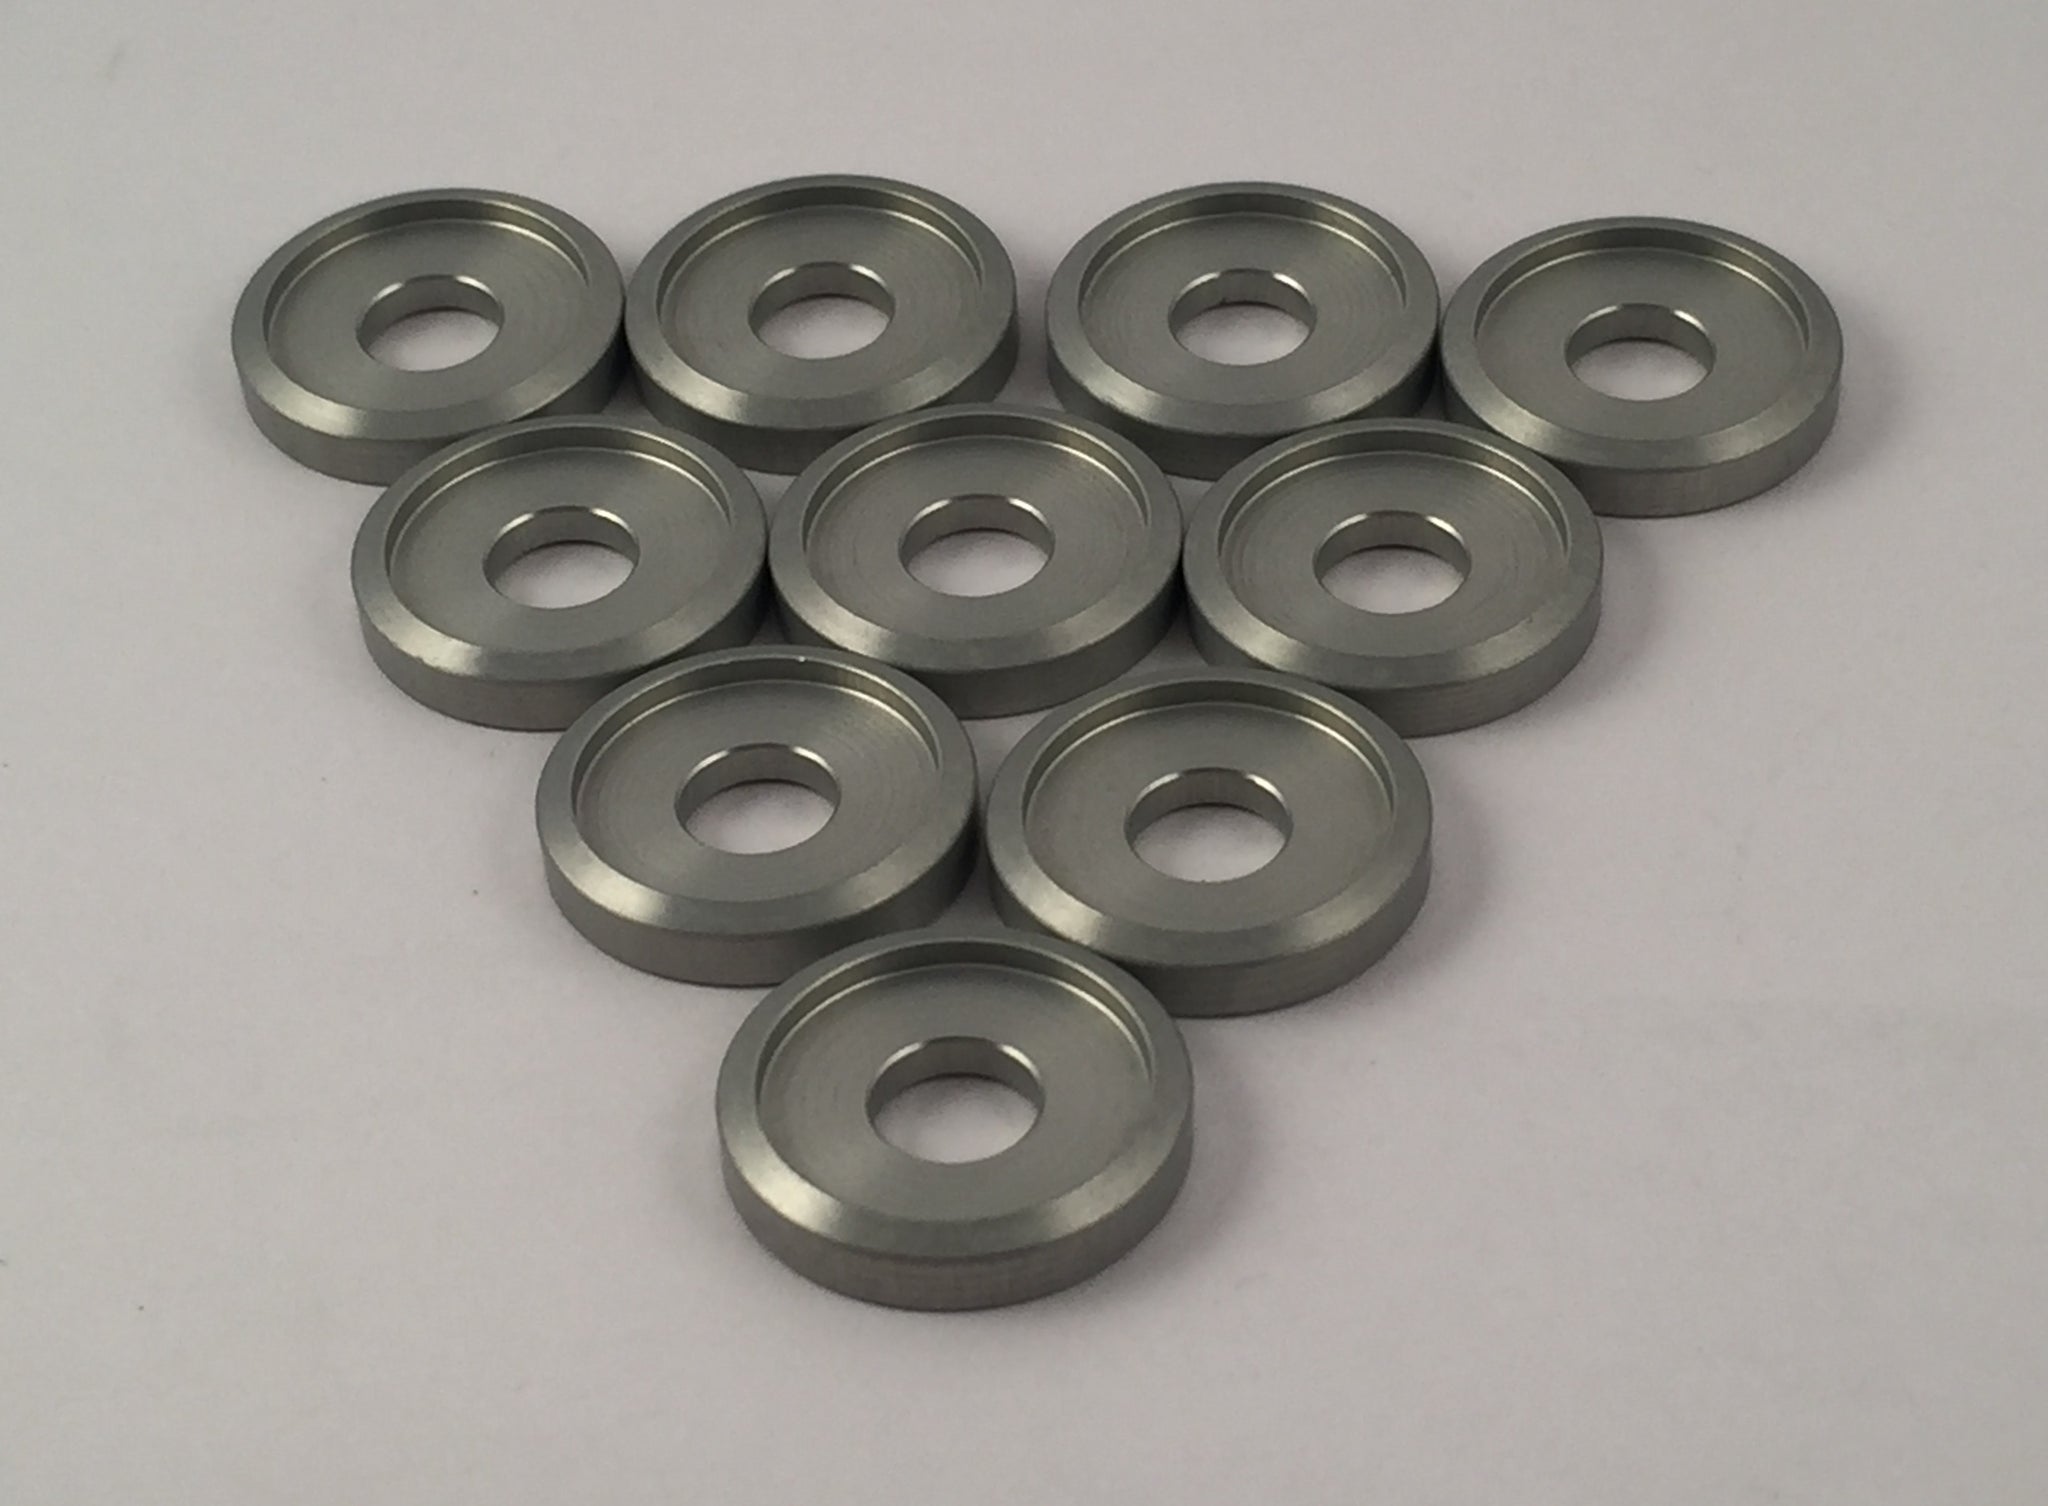 M6 Steel Washer Form C A4 10 Pack